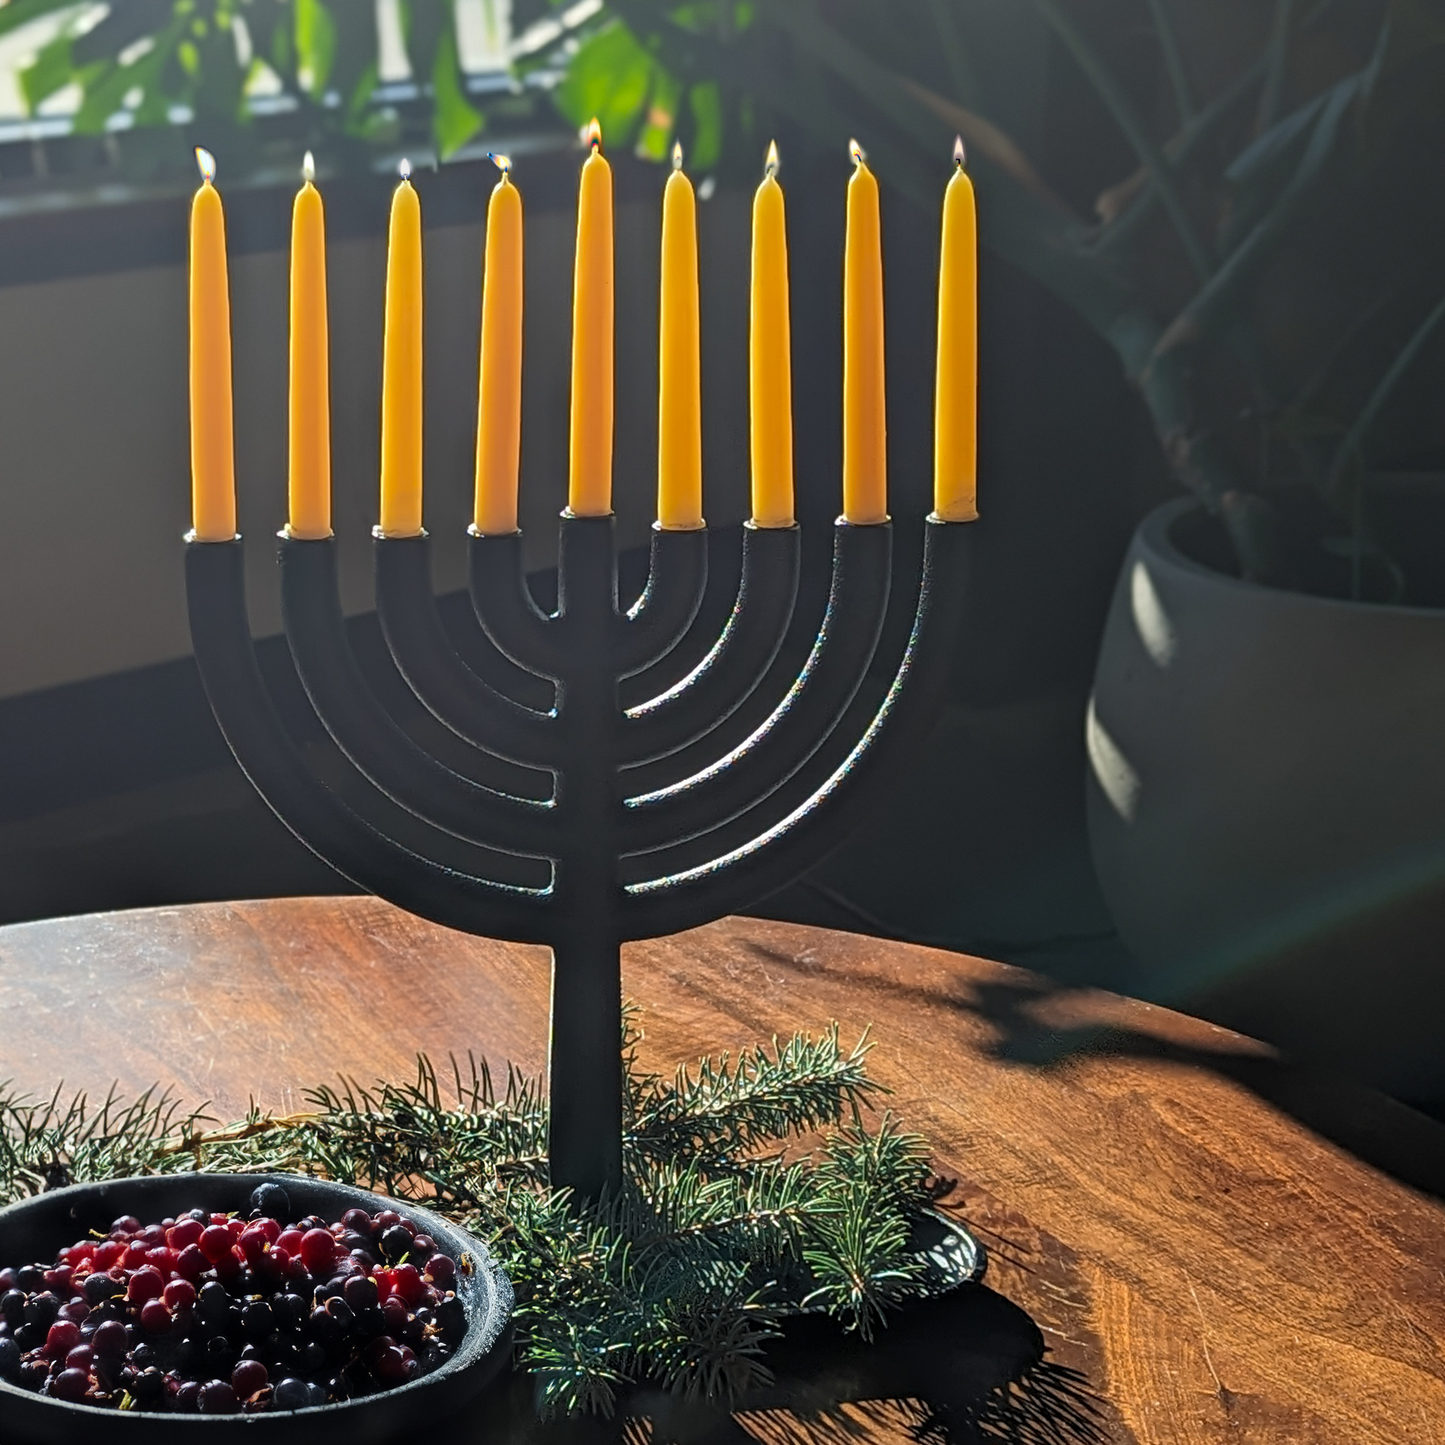 PREORDER - Pure Beeswax Chanukah Candles - 44 Hand-Dipped Menorah Tapers